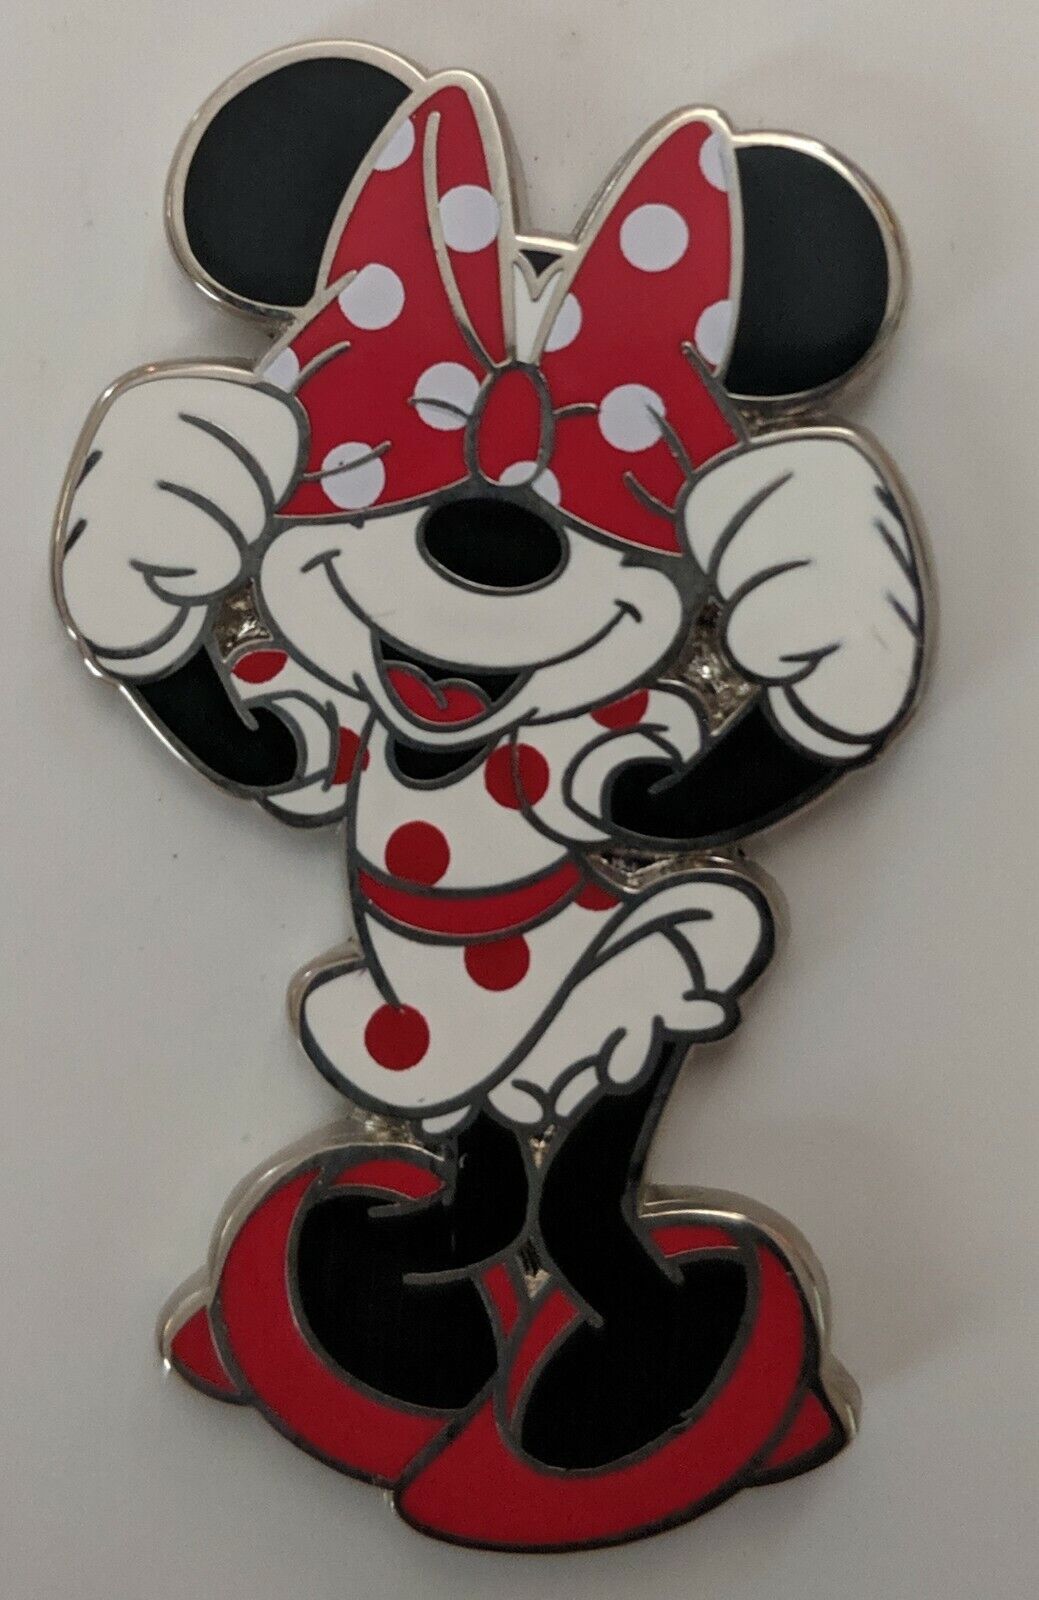 Disney Minnie Mouse Bow Pulled Down Over Covering Eyes Peek A Boo Pin